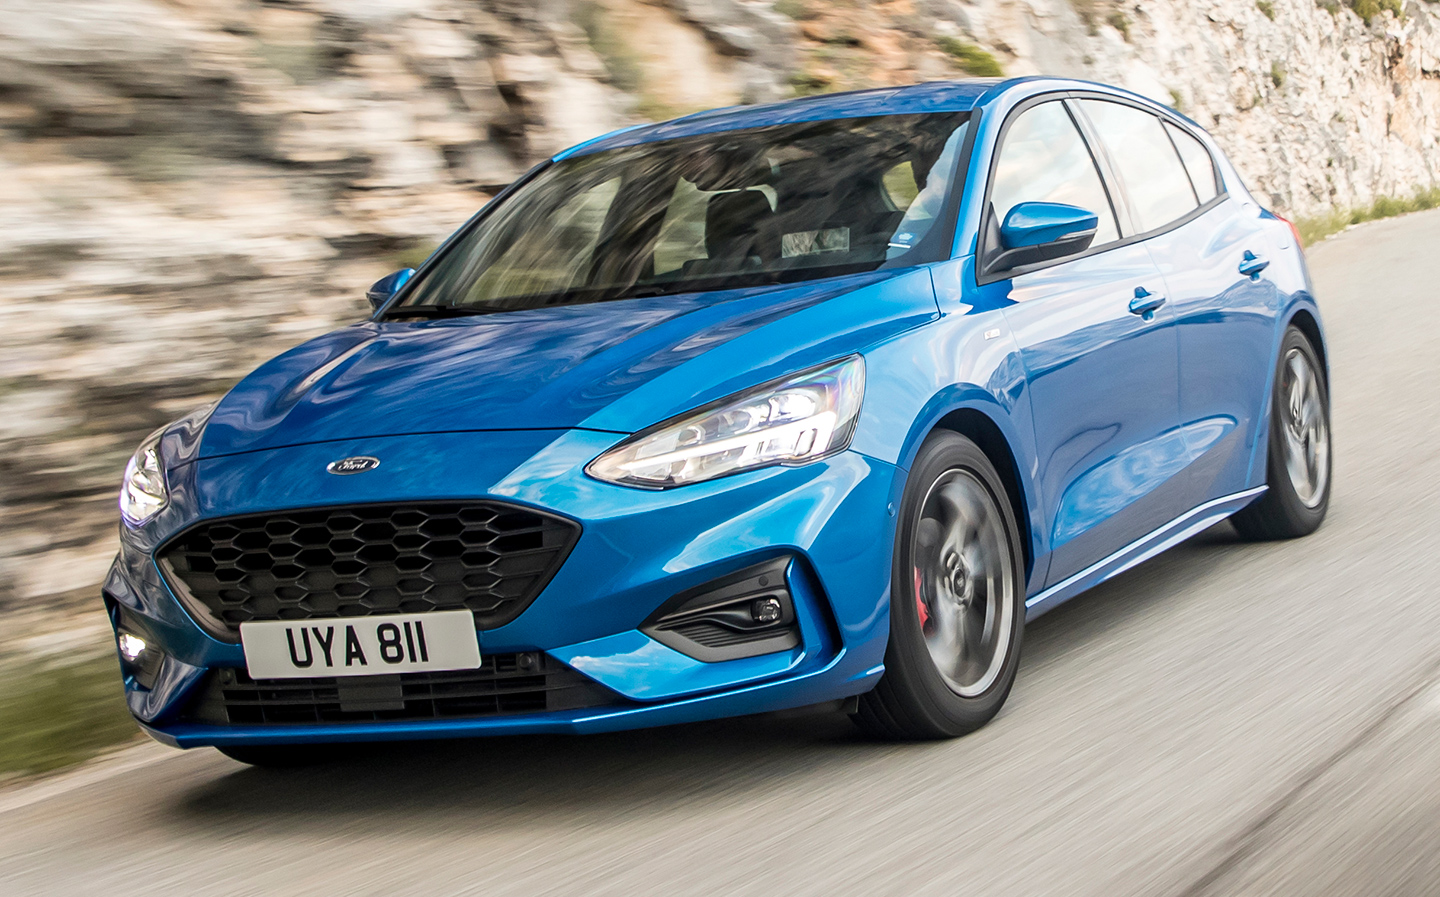 Sunday Times Motor Awards 2018 - best family car nominees - Ford Focus